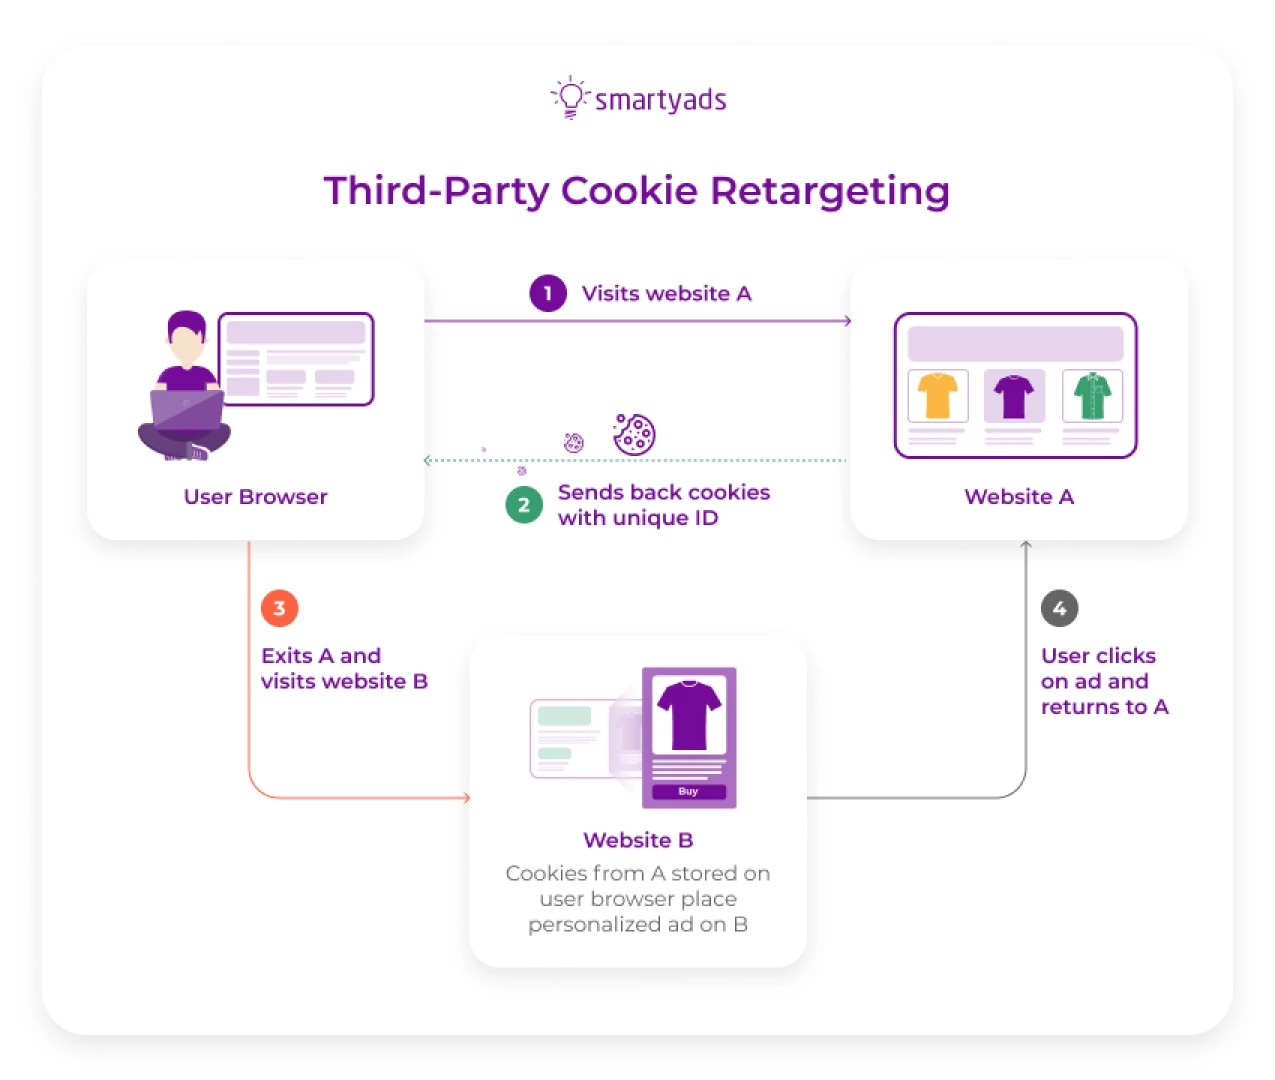 how third-party cookie works